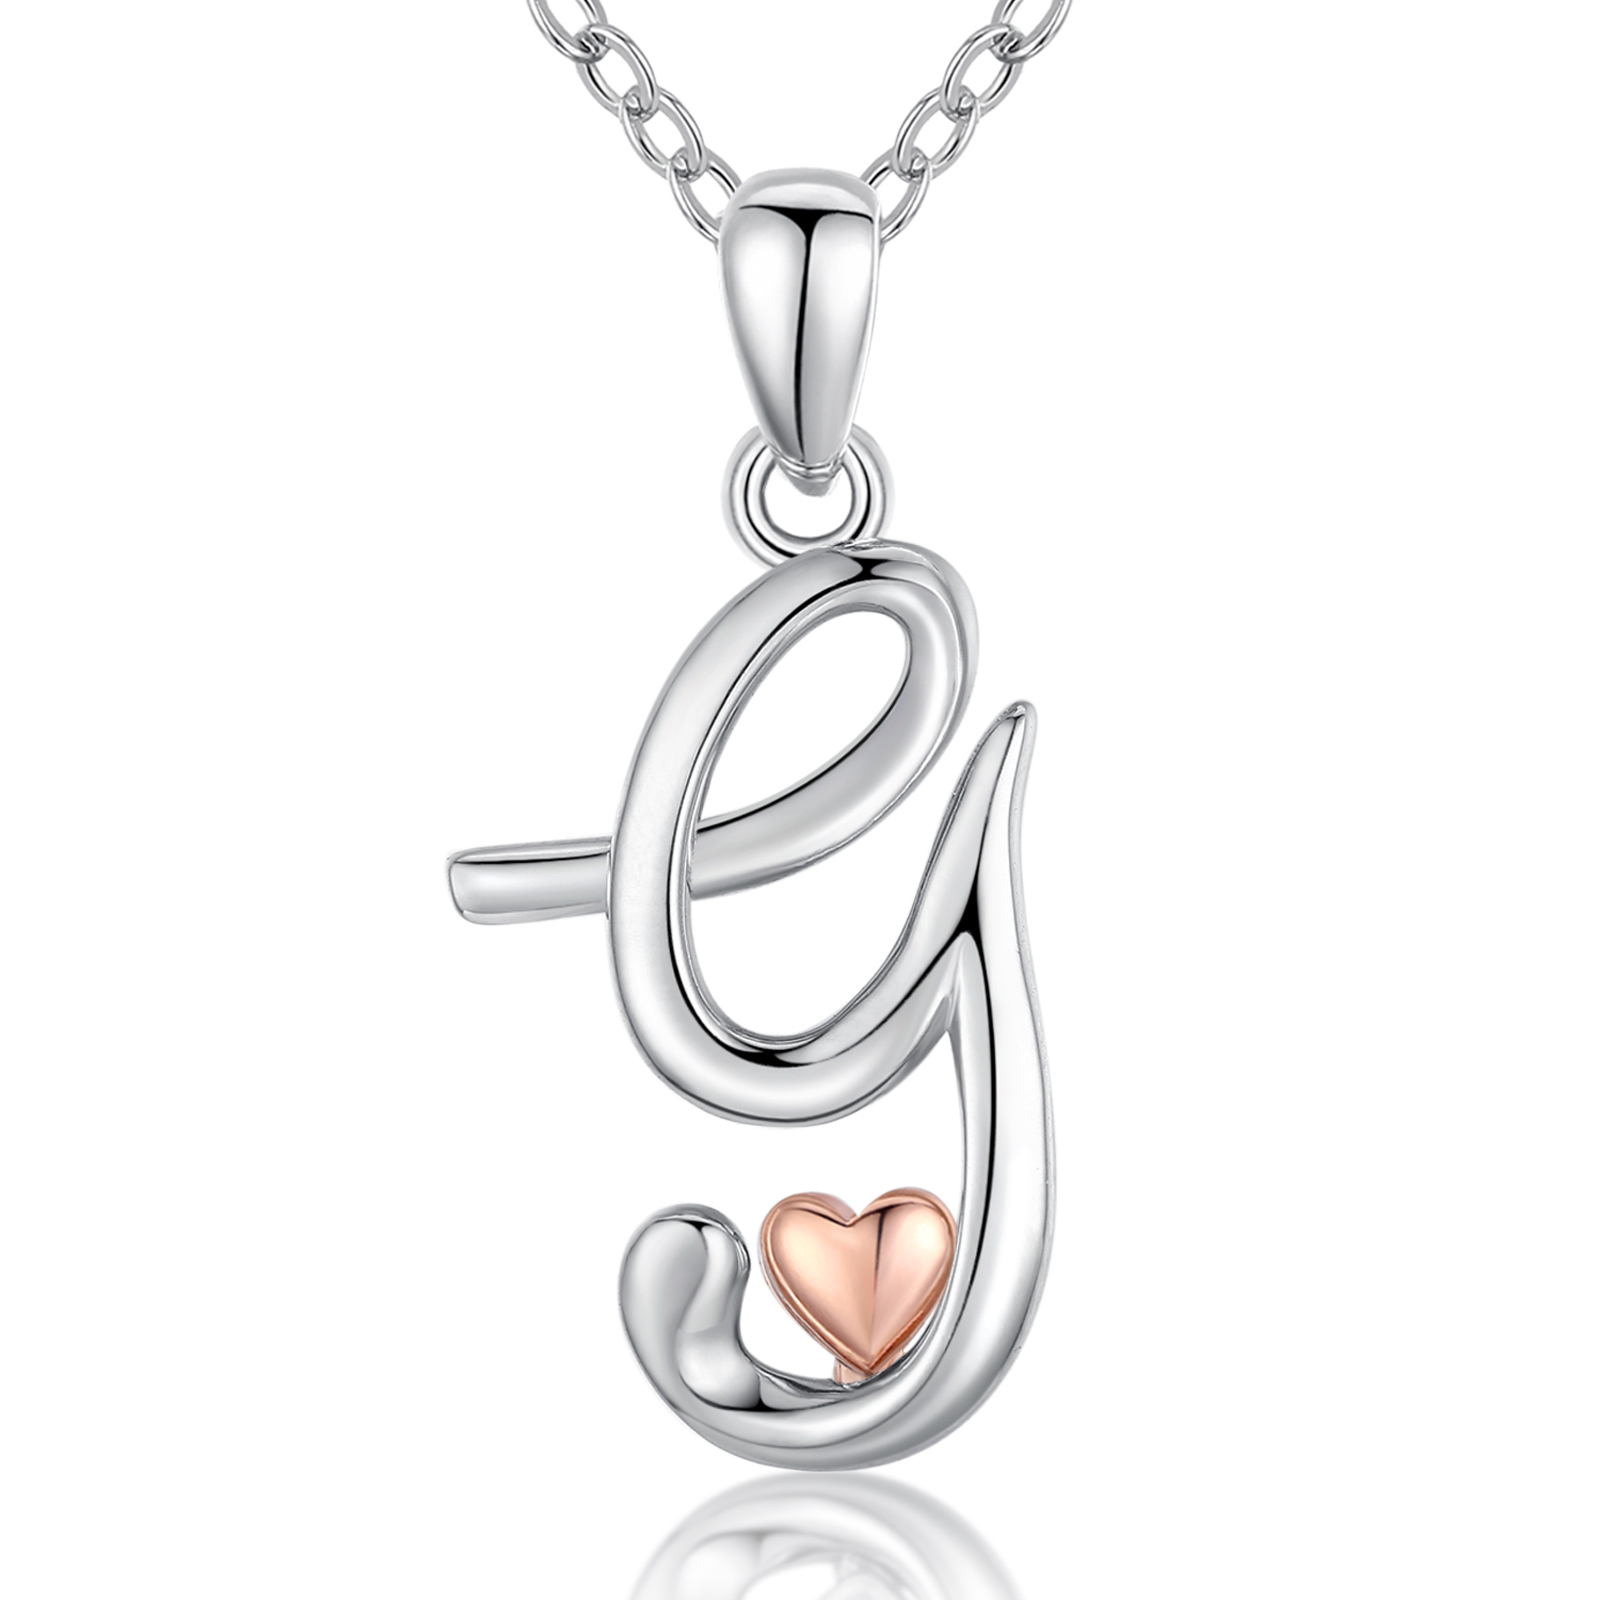 Merryshine Jewelry fastness s925 sterling silver plated rhodium letter Y initial pendant necklace for women